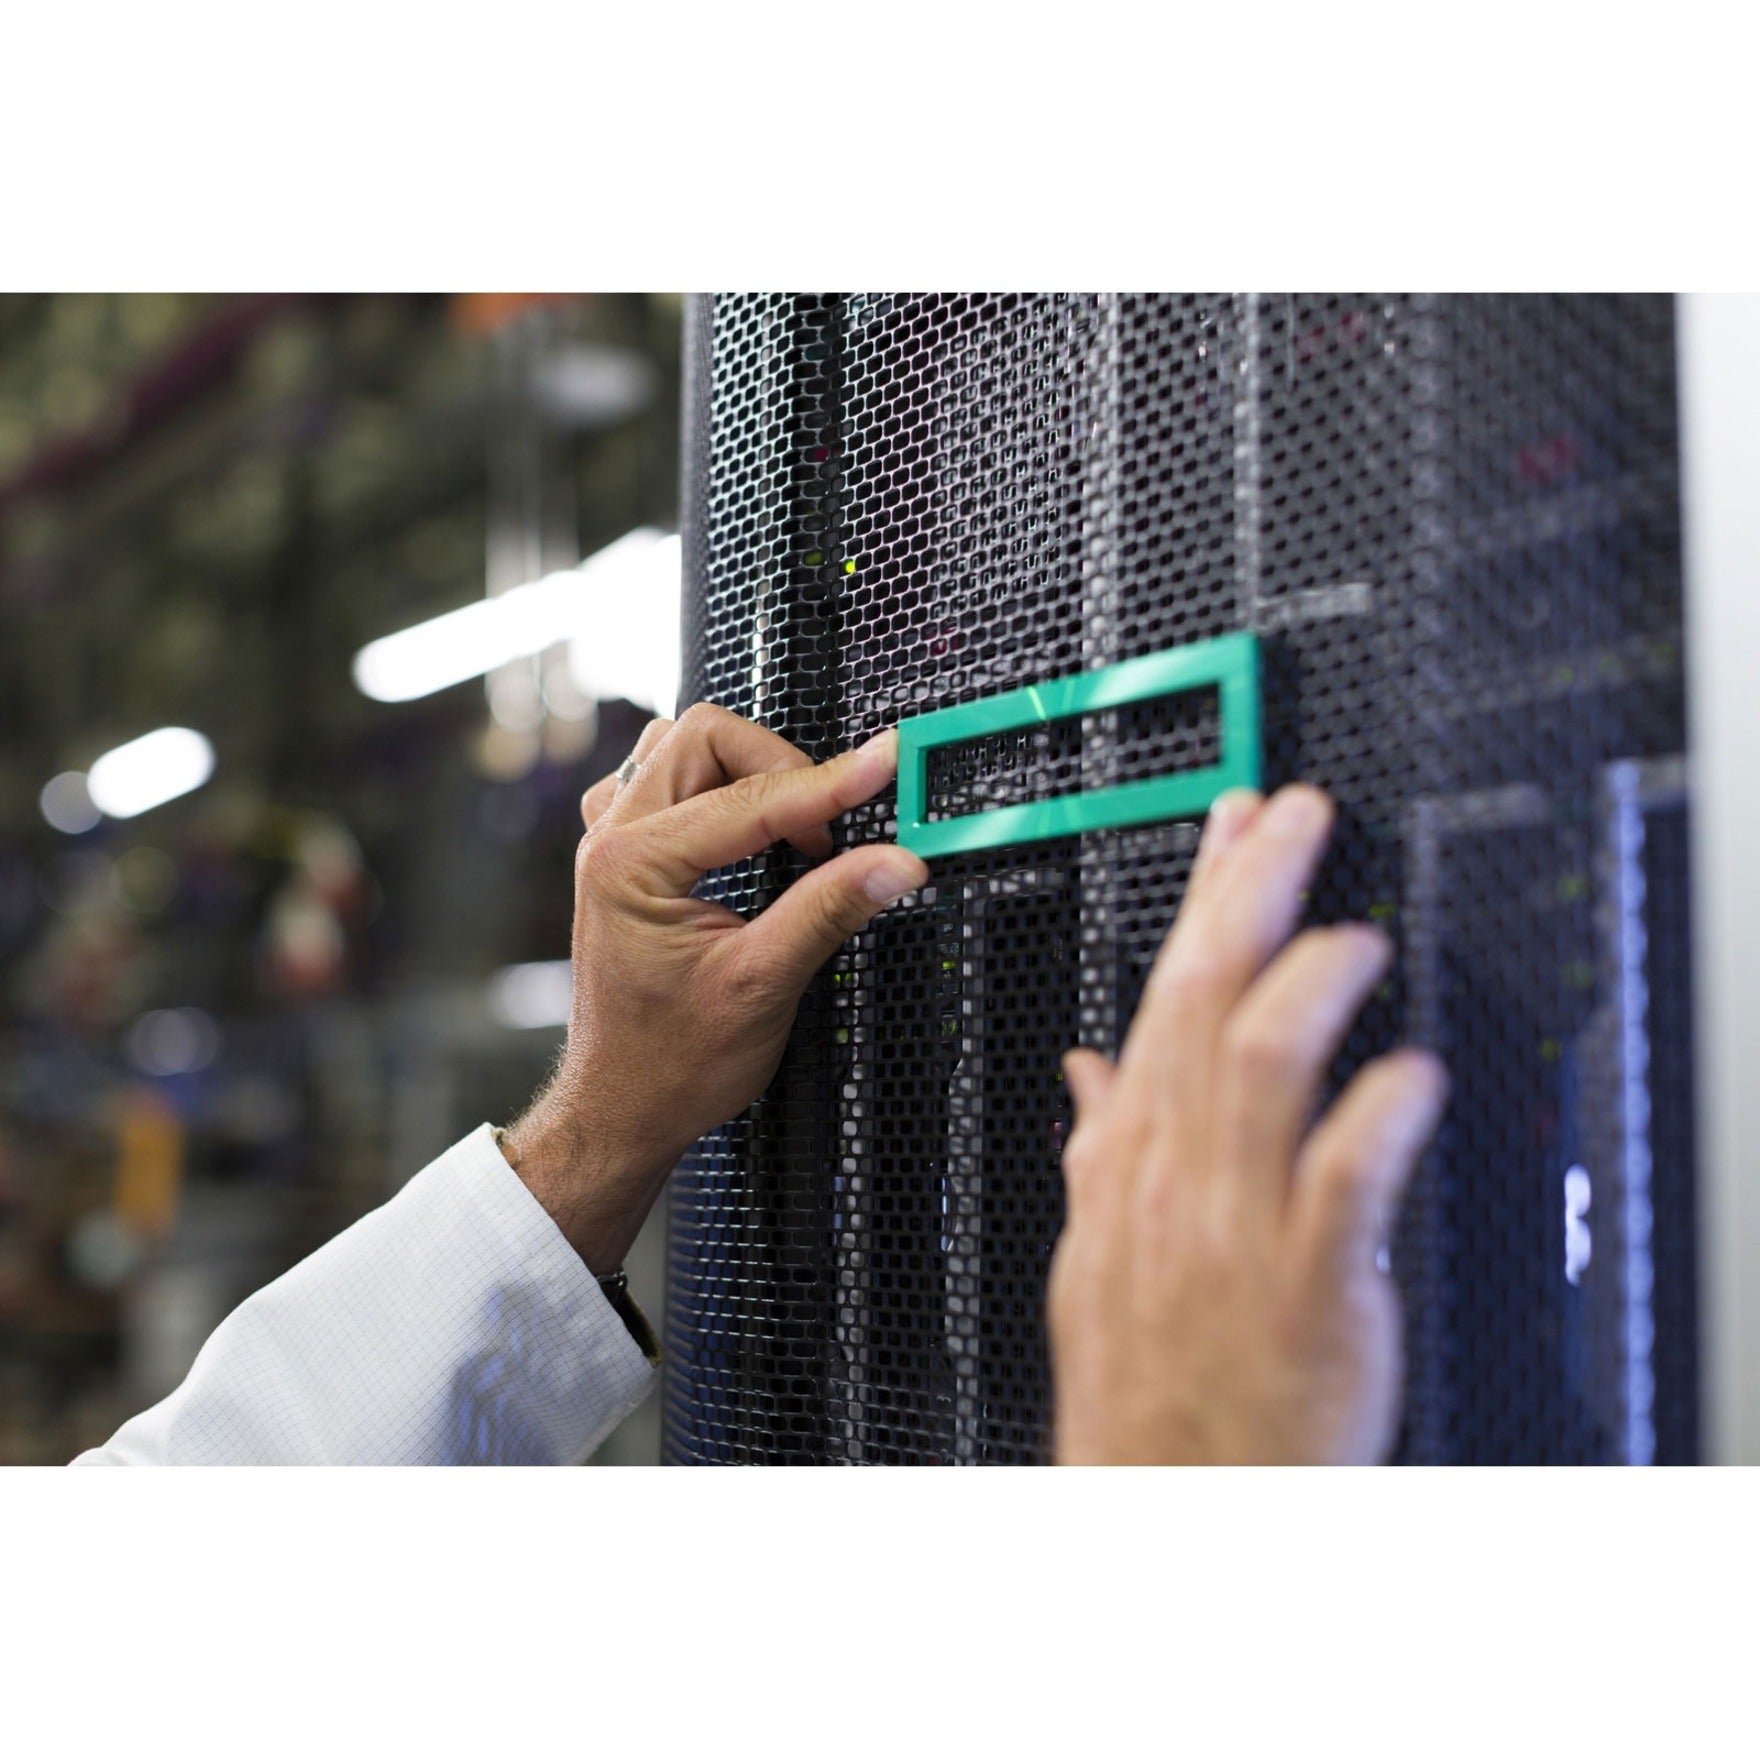 HPE 882015-B21 DL180 Gen10 LFF to Smart Array E208i-a/P408i-a Cable Kit, Easy Installation and Improved Connectivity